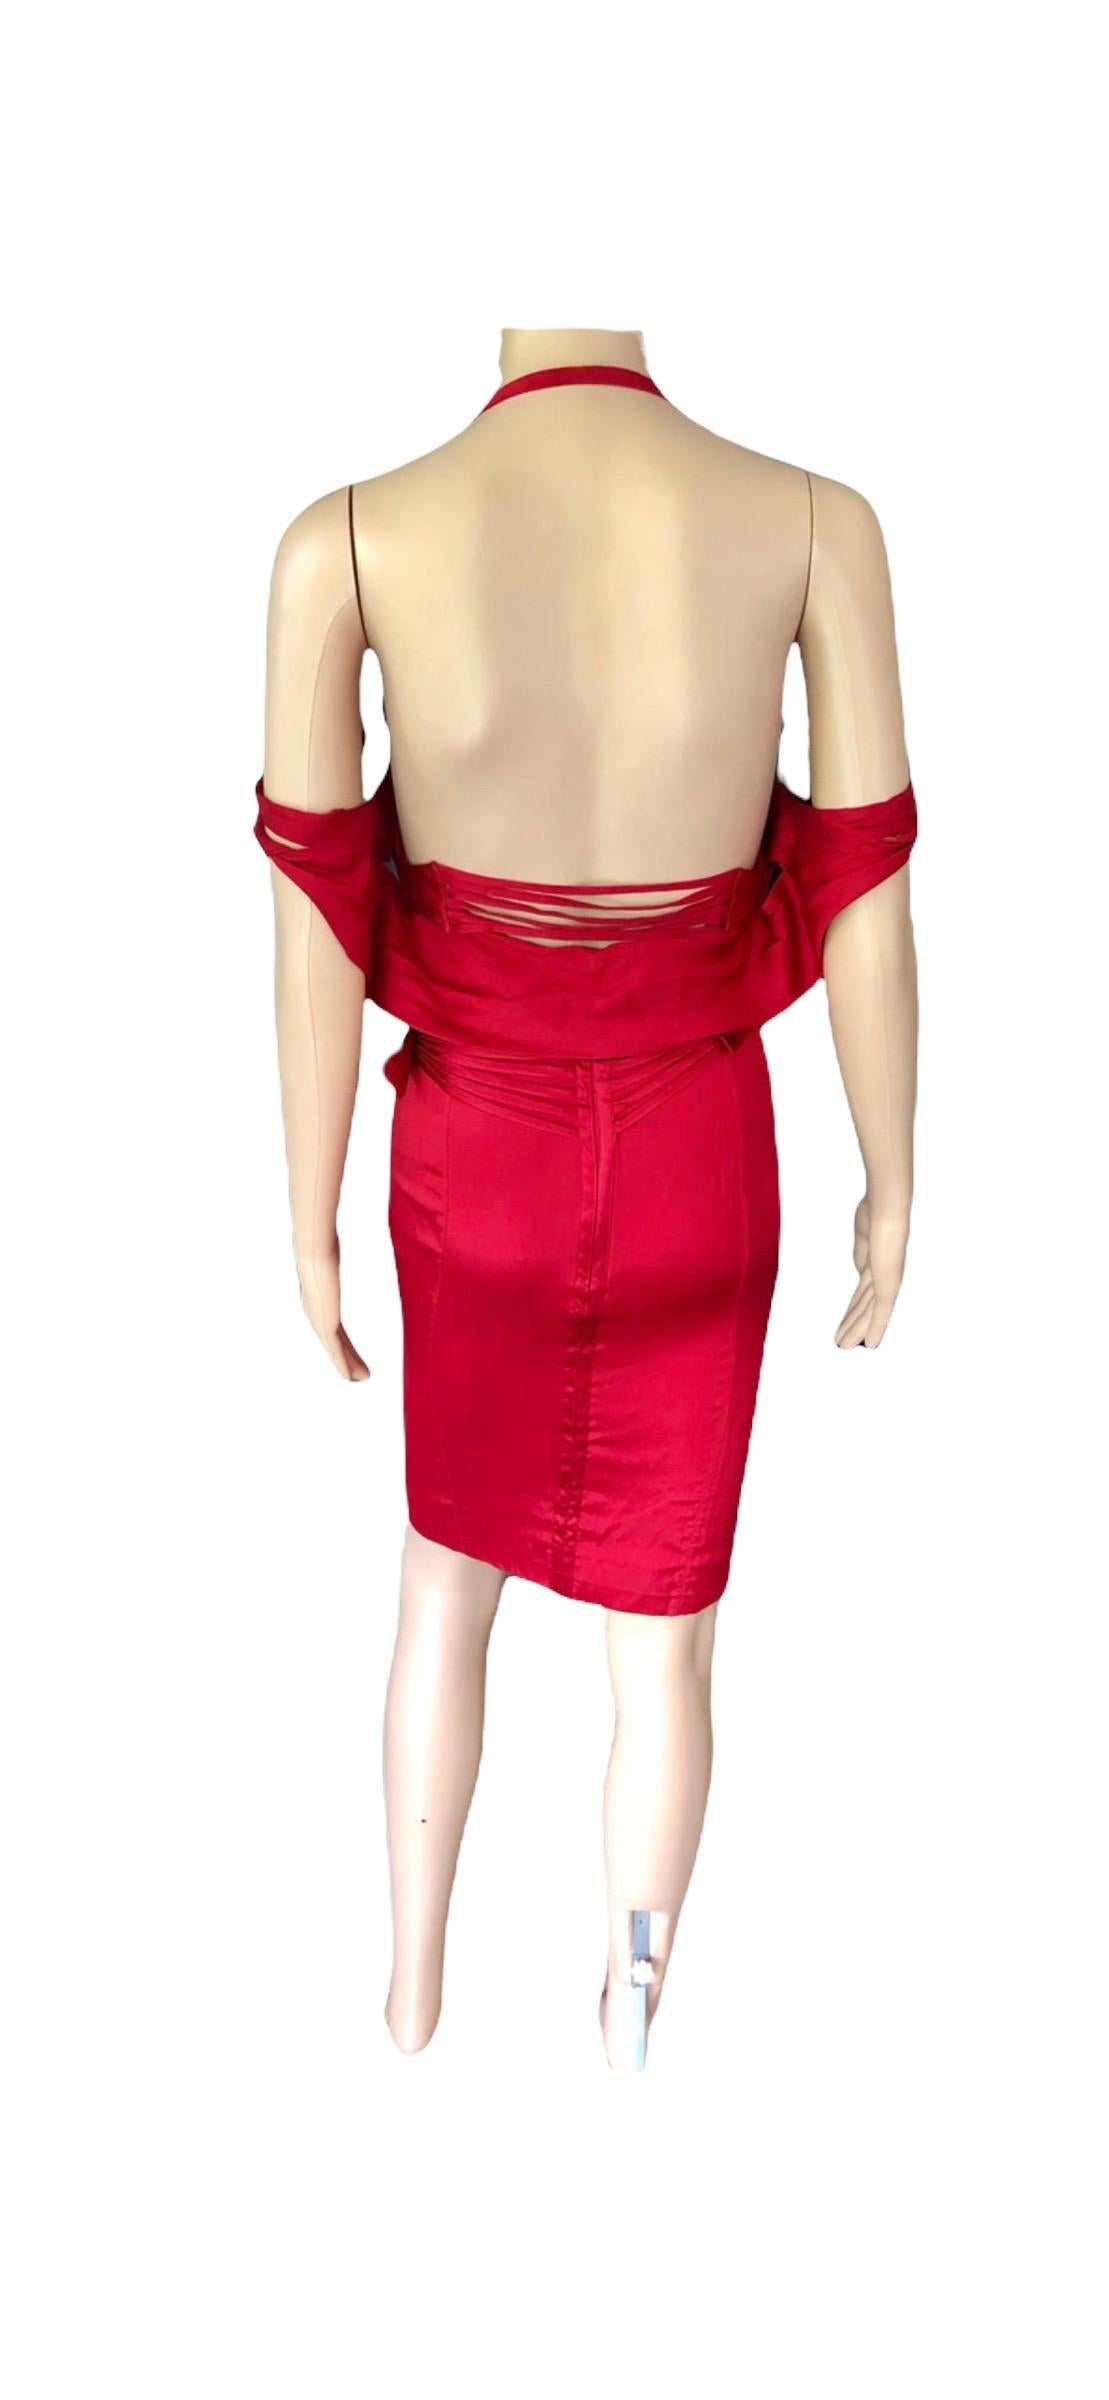 Tom Ford for Gucci F/W 2003 Runway Bustier Corset Silk Red Dress 13